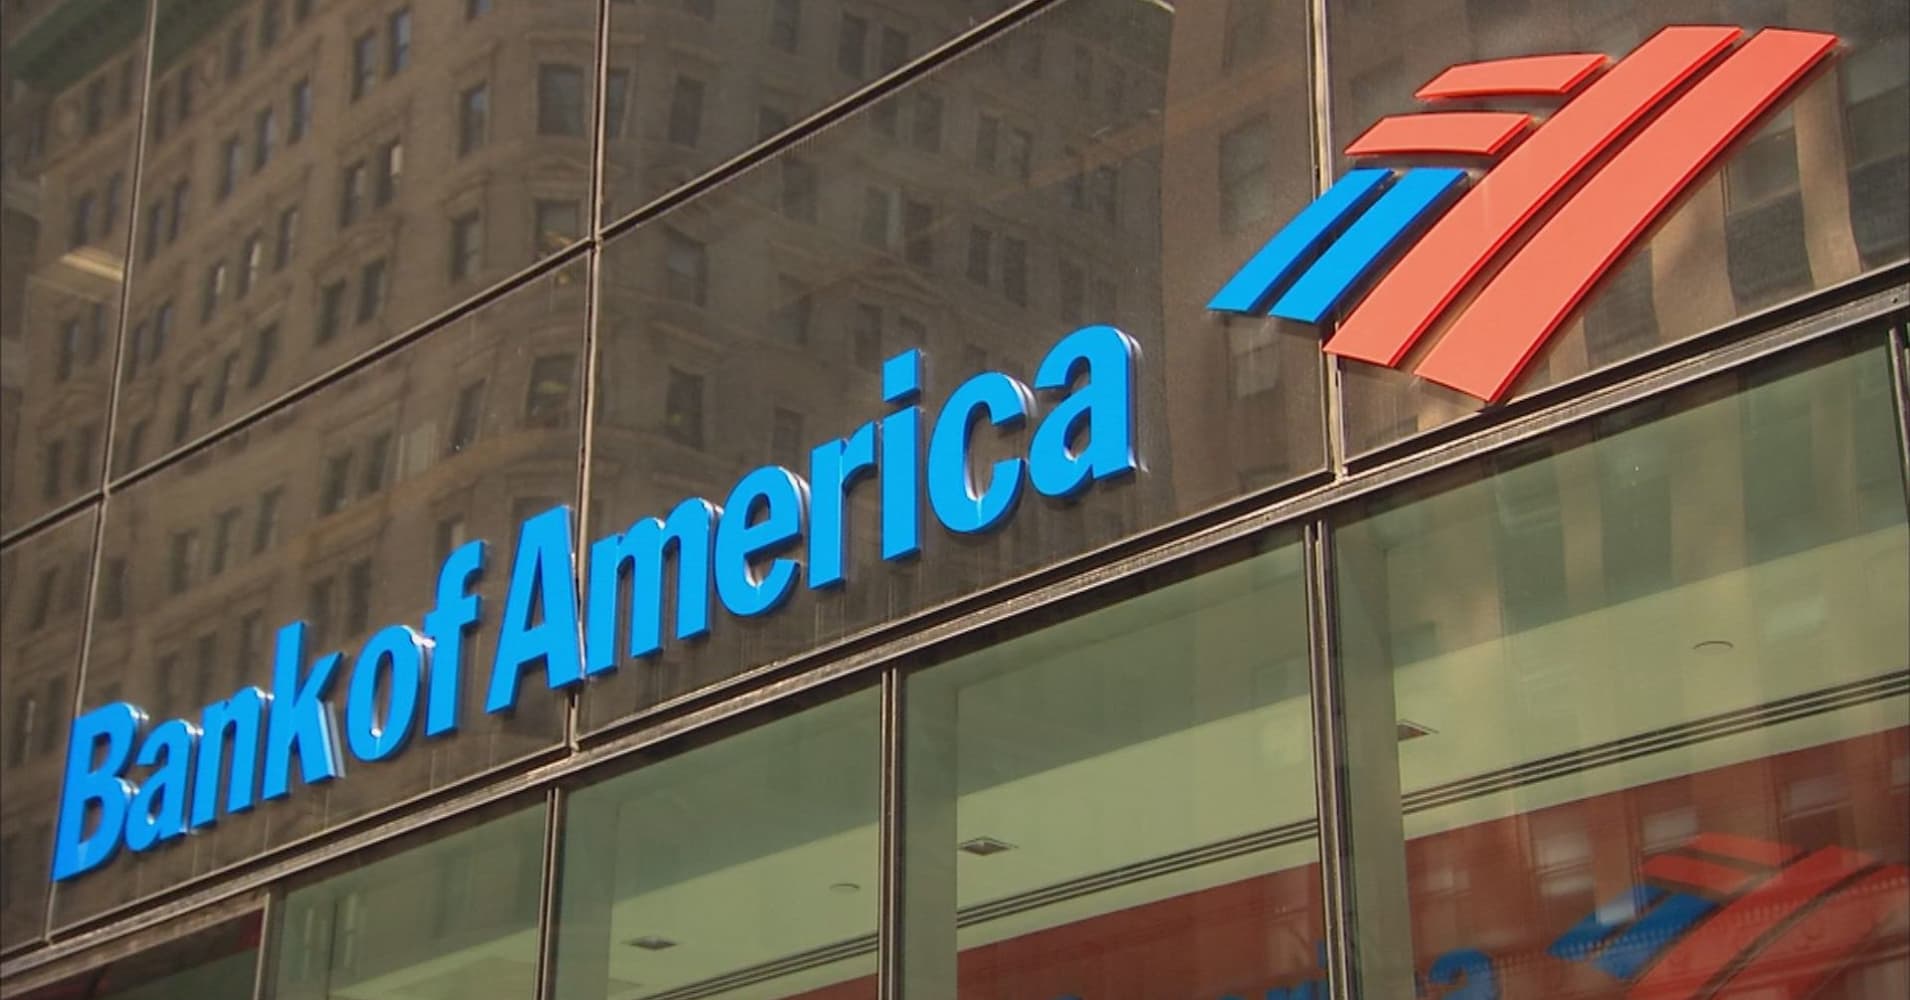 Florida judge rejects sanctions against Bank of America